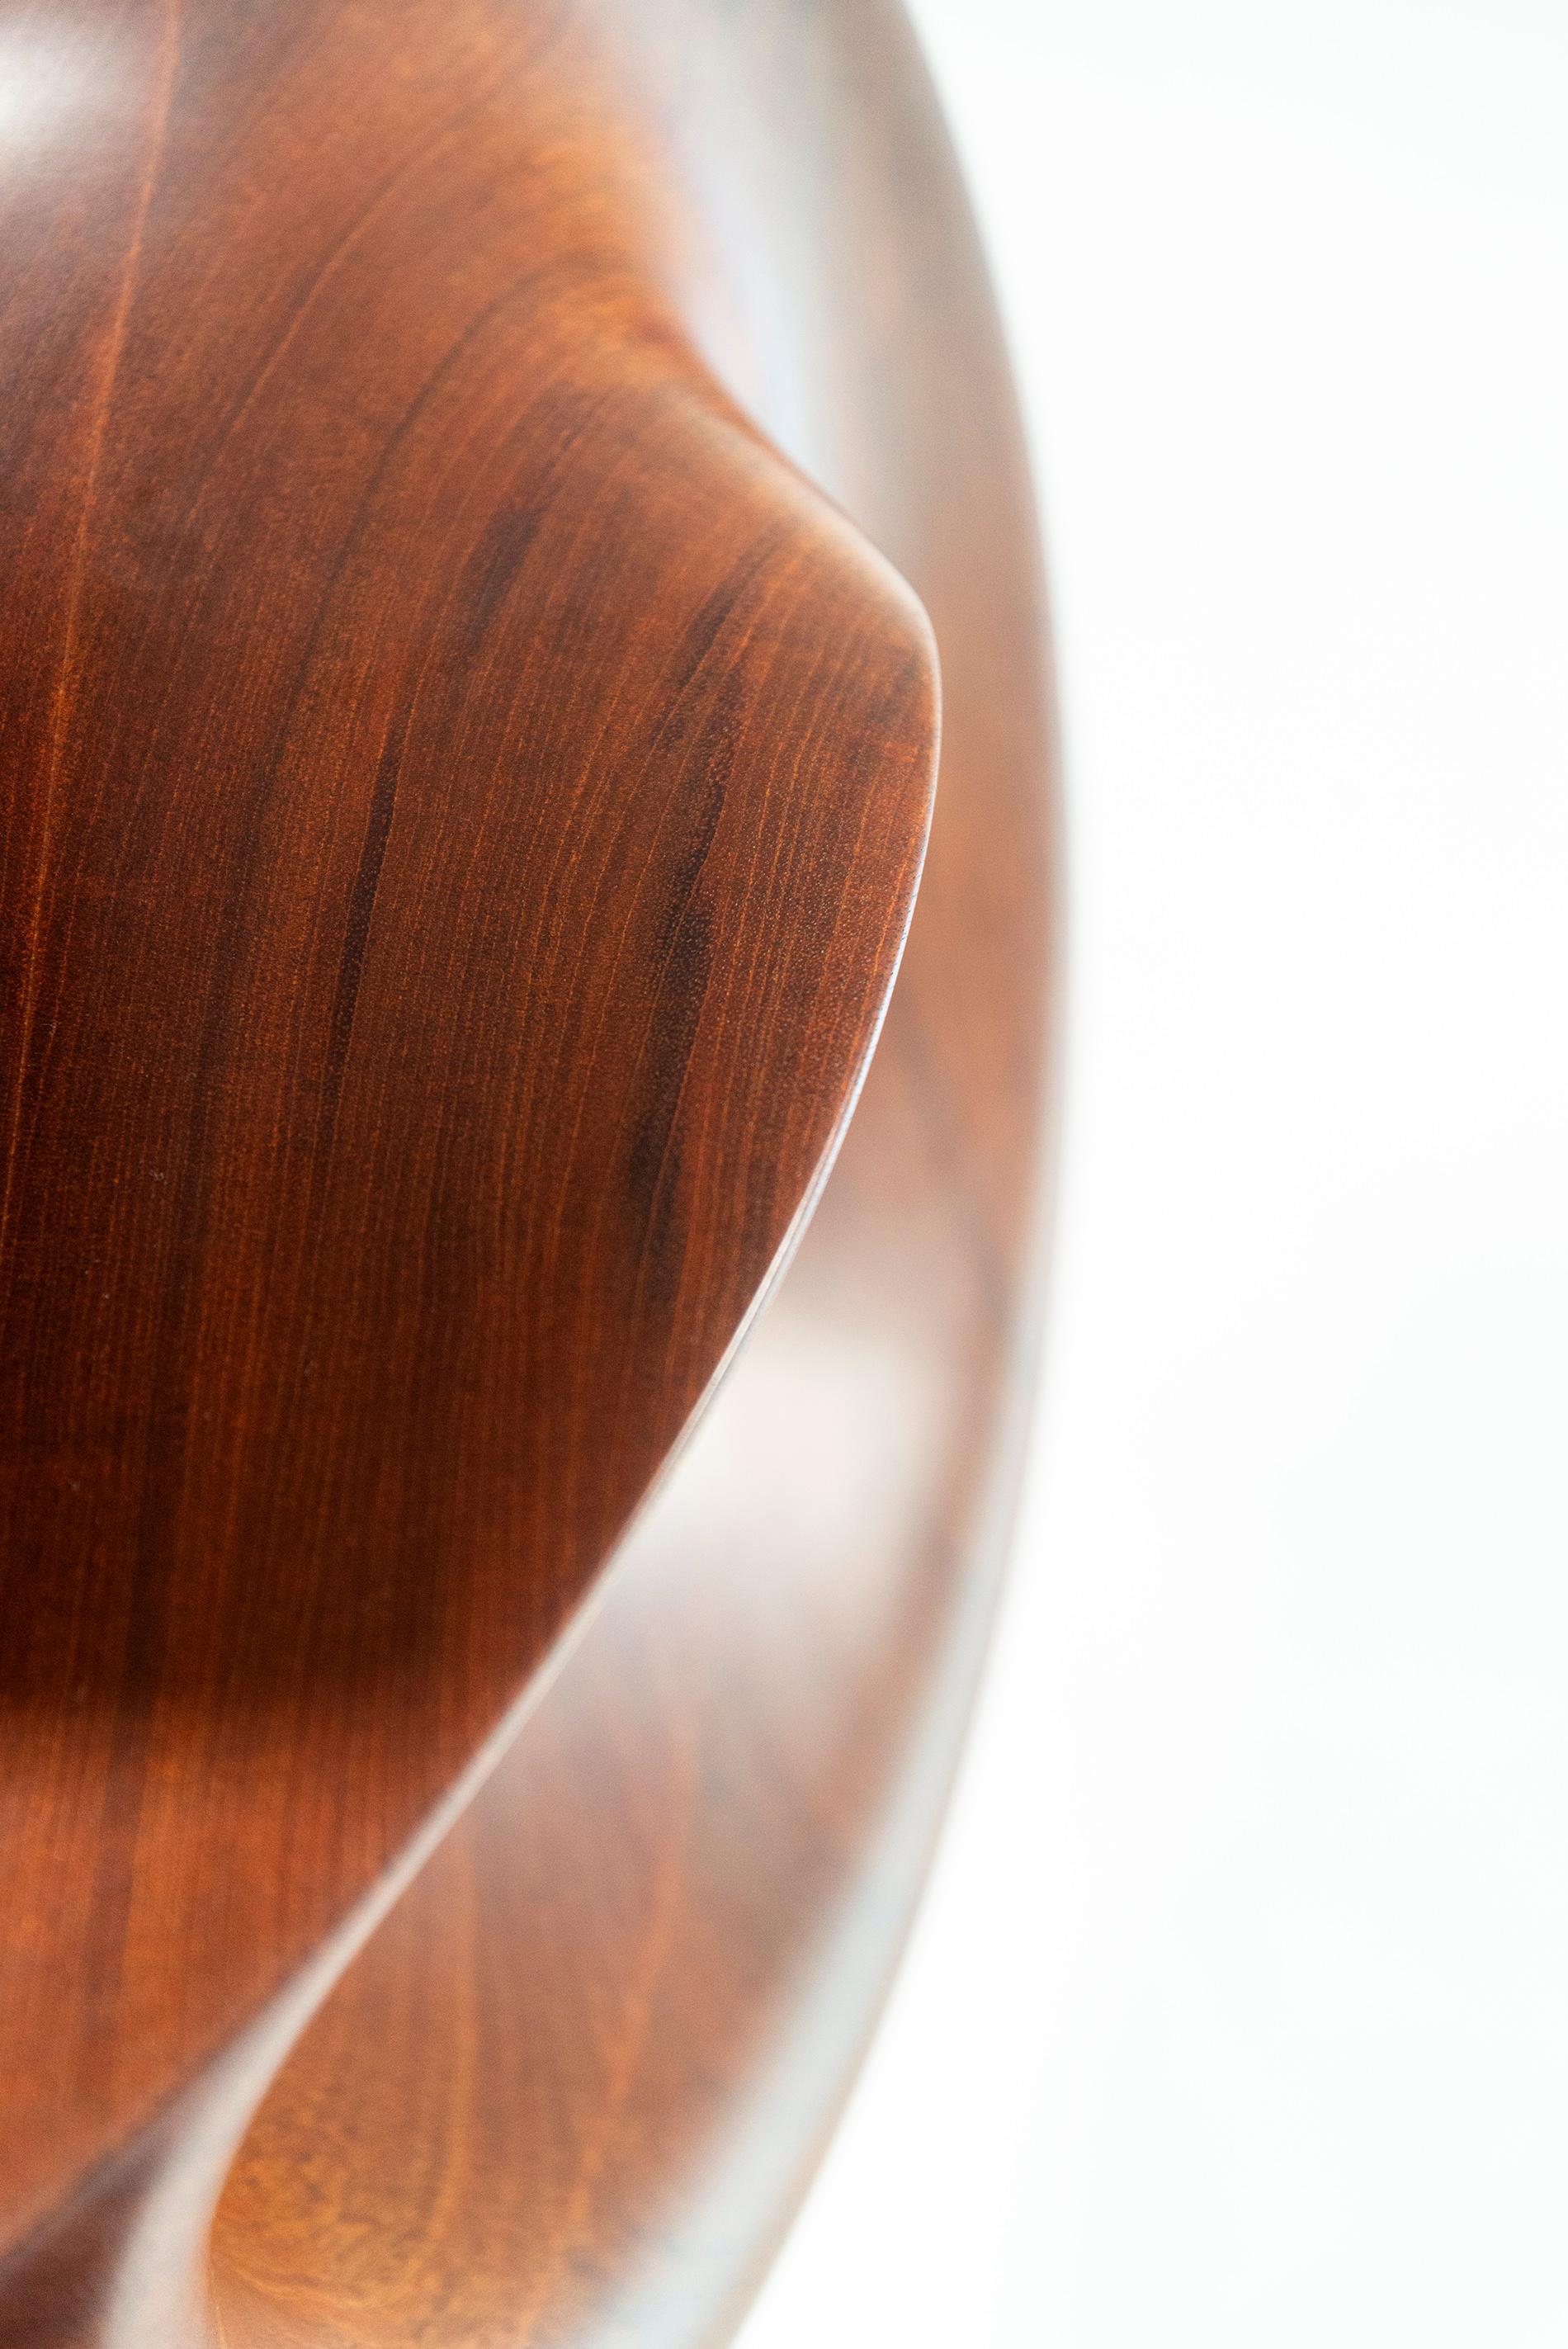 Fanfare - smooth, polished, abstract, contemporary, mahogany carved sculpture 9